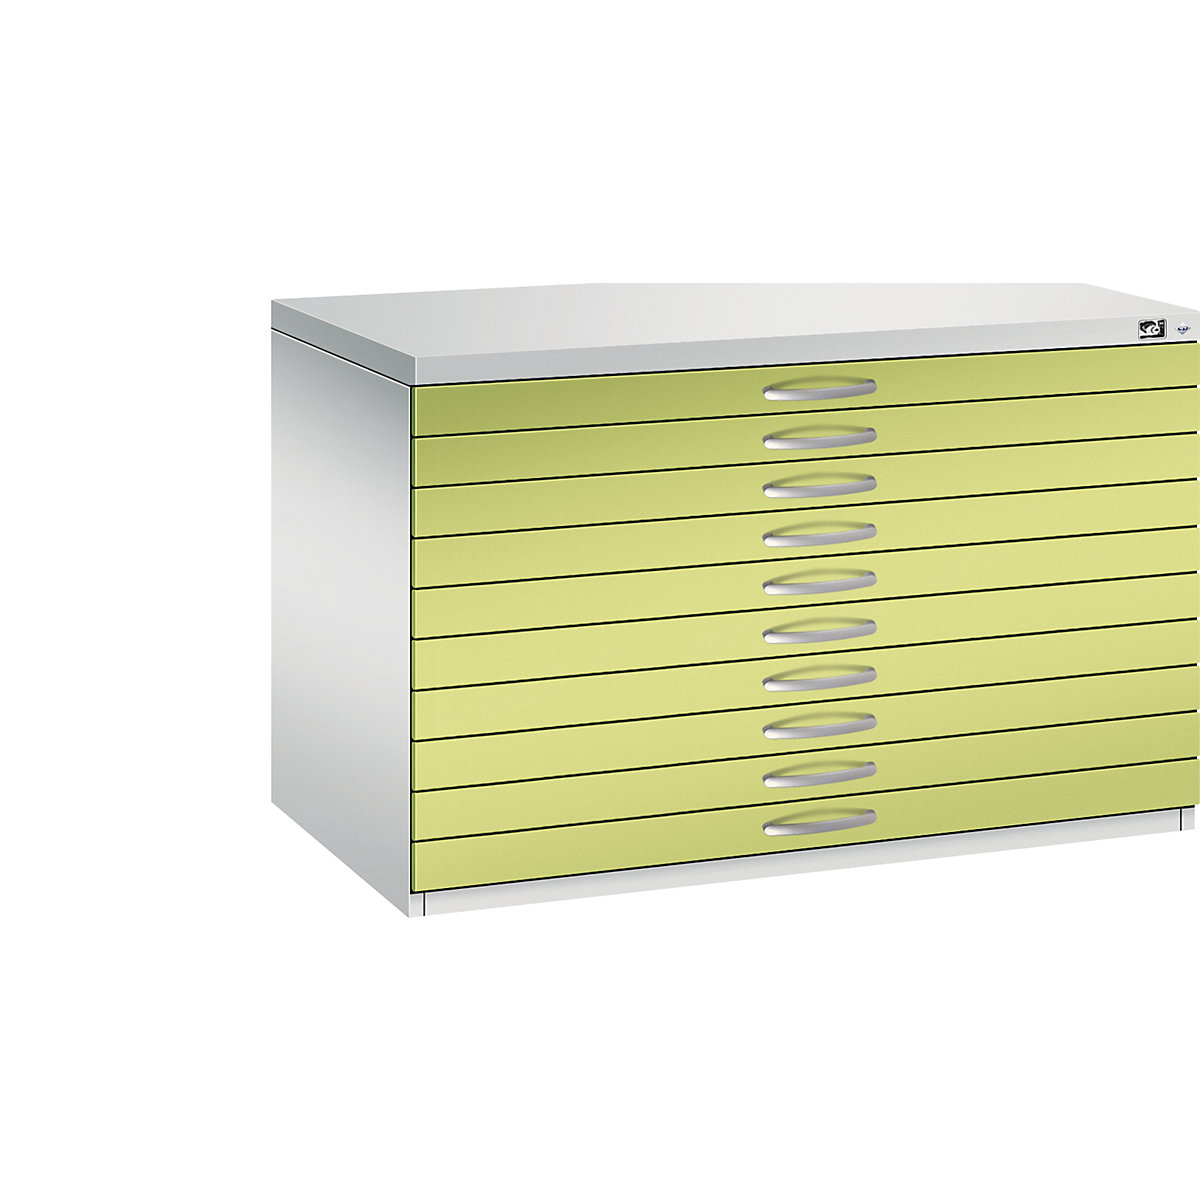 Drawing cabinet – C+P, A1, 10 drawers, height 760 mm, light grey / viridian green-17